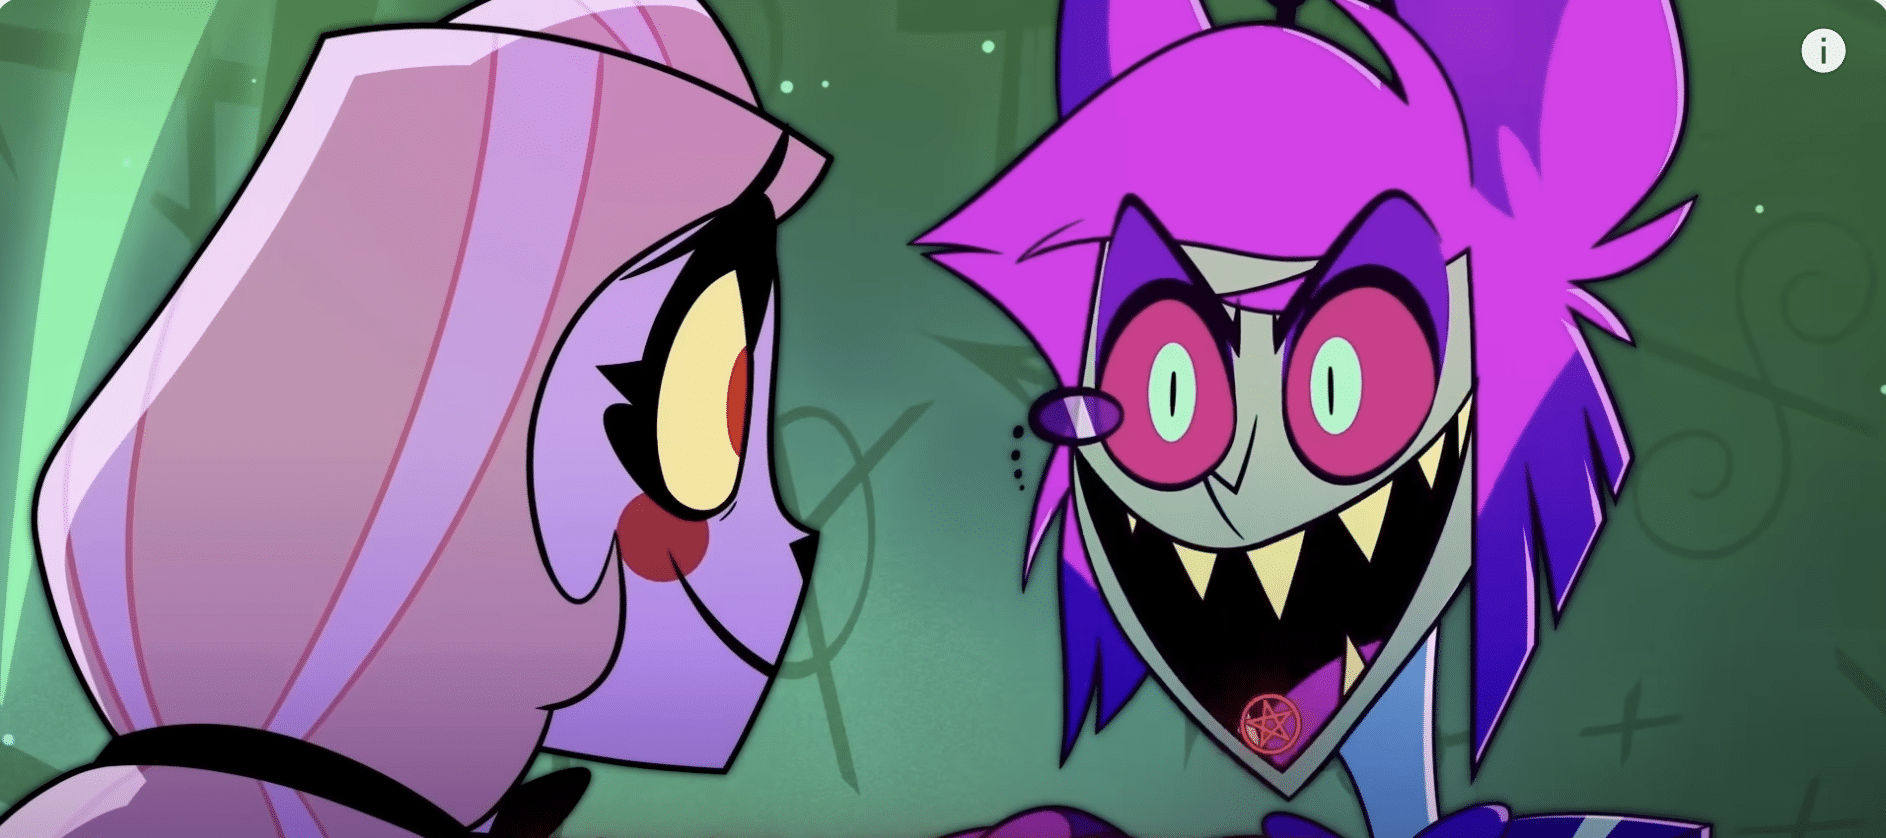 New “Satanic” Amazon Prime cartoon called ‘Hazbin Hotel’ sparks outrage and protest